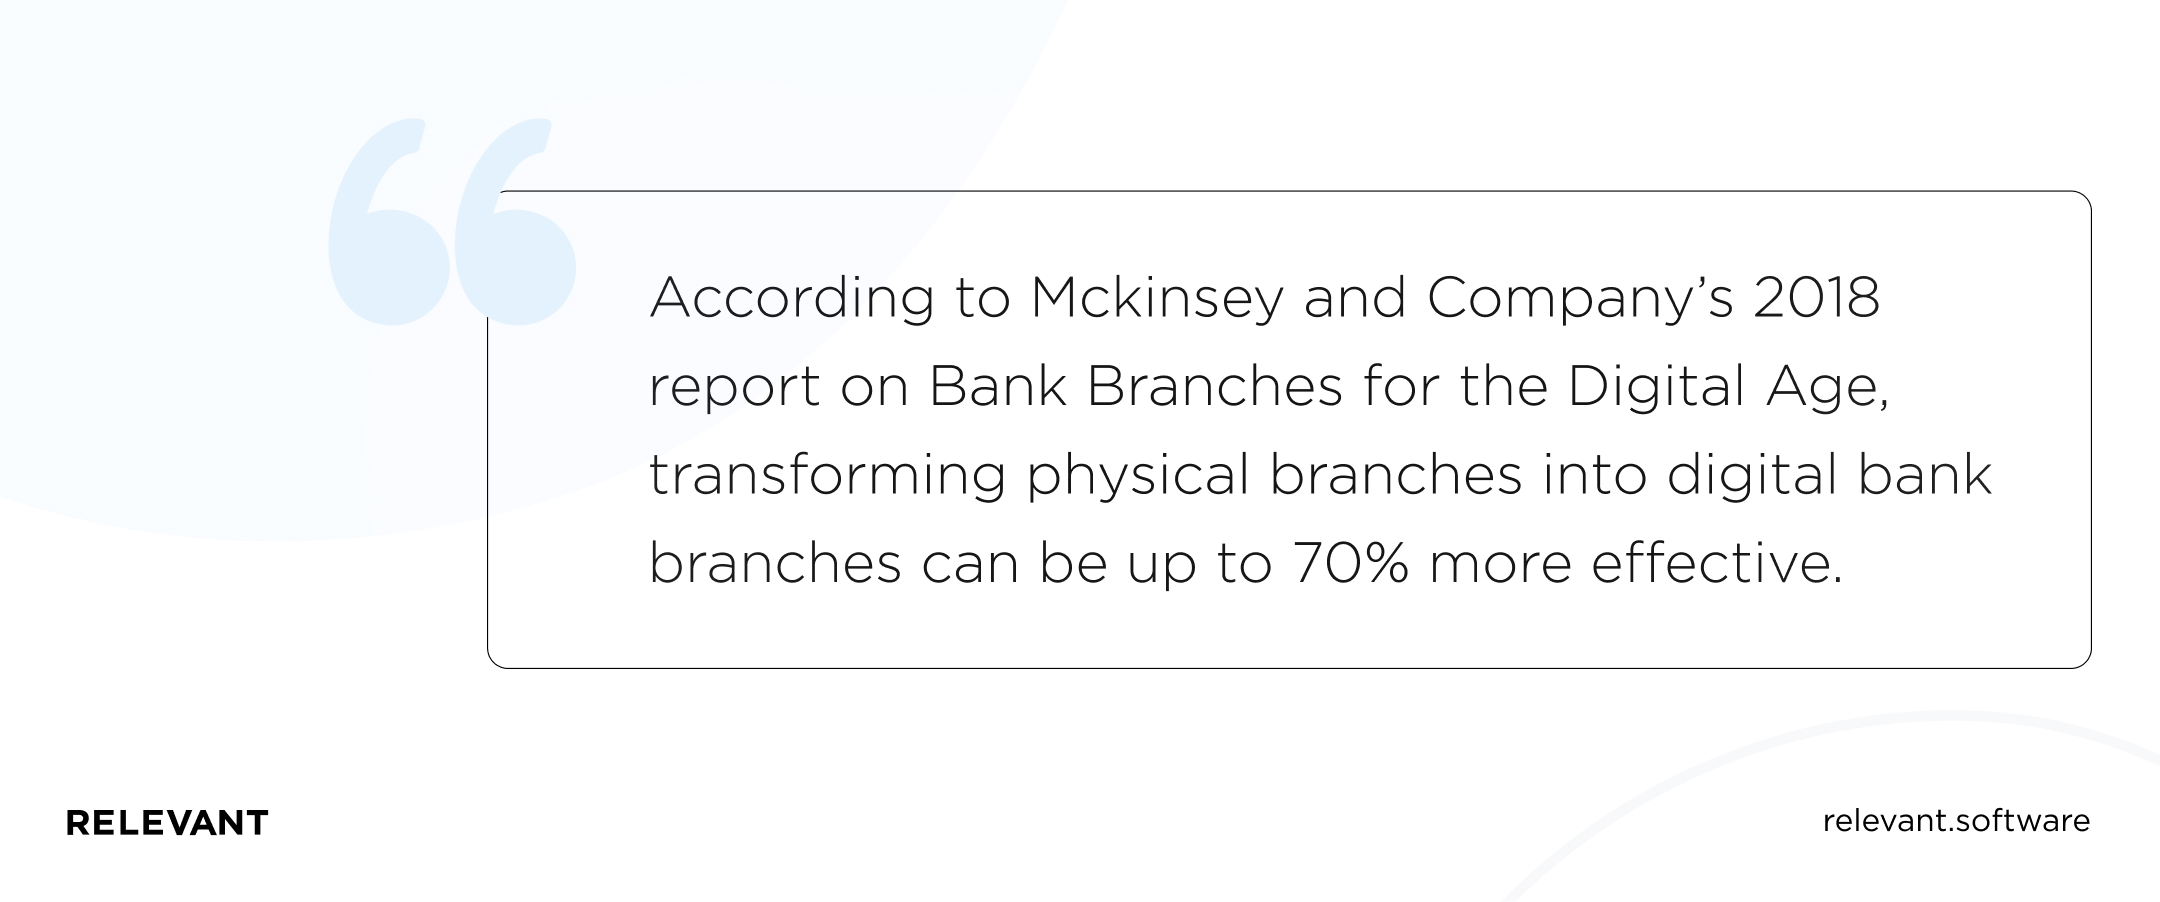 According to Mckinsey and Company’s 2018 report on Bank Branches for the Digital Age, transforming physical branches into digital bank branches can be up to 70% more effective.